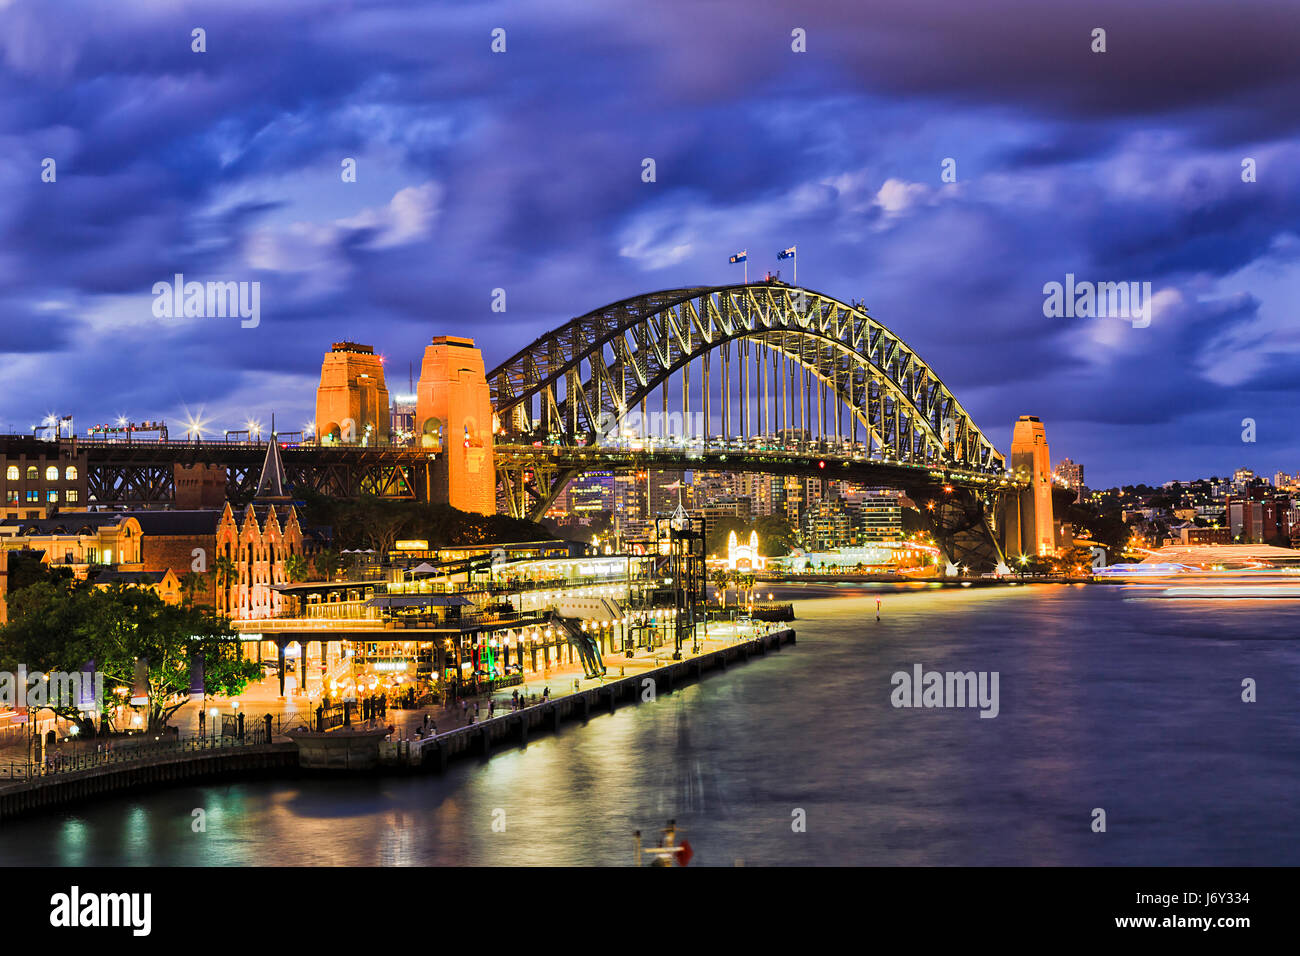 Huge illuminated arch of Sydney Harbour bridge connecting city CBD from the Rocks to North Sydney. Bright lights reflect in blurred waters of Sydney H Stock Photo